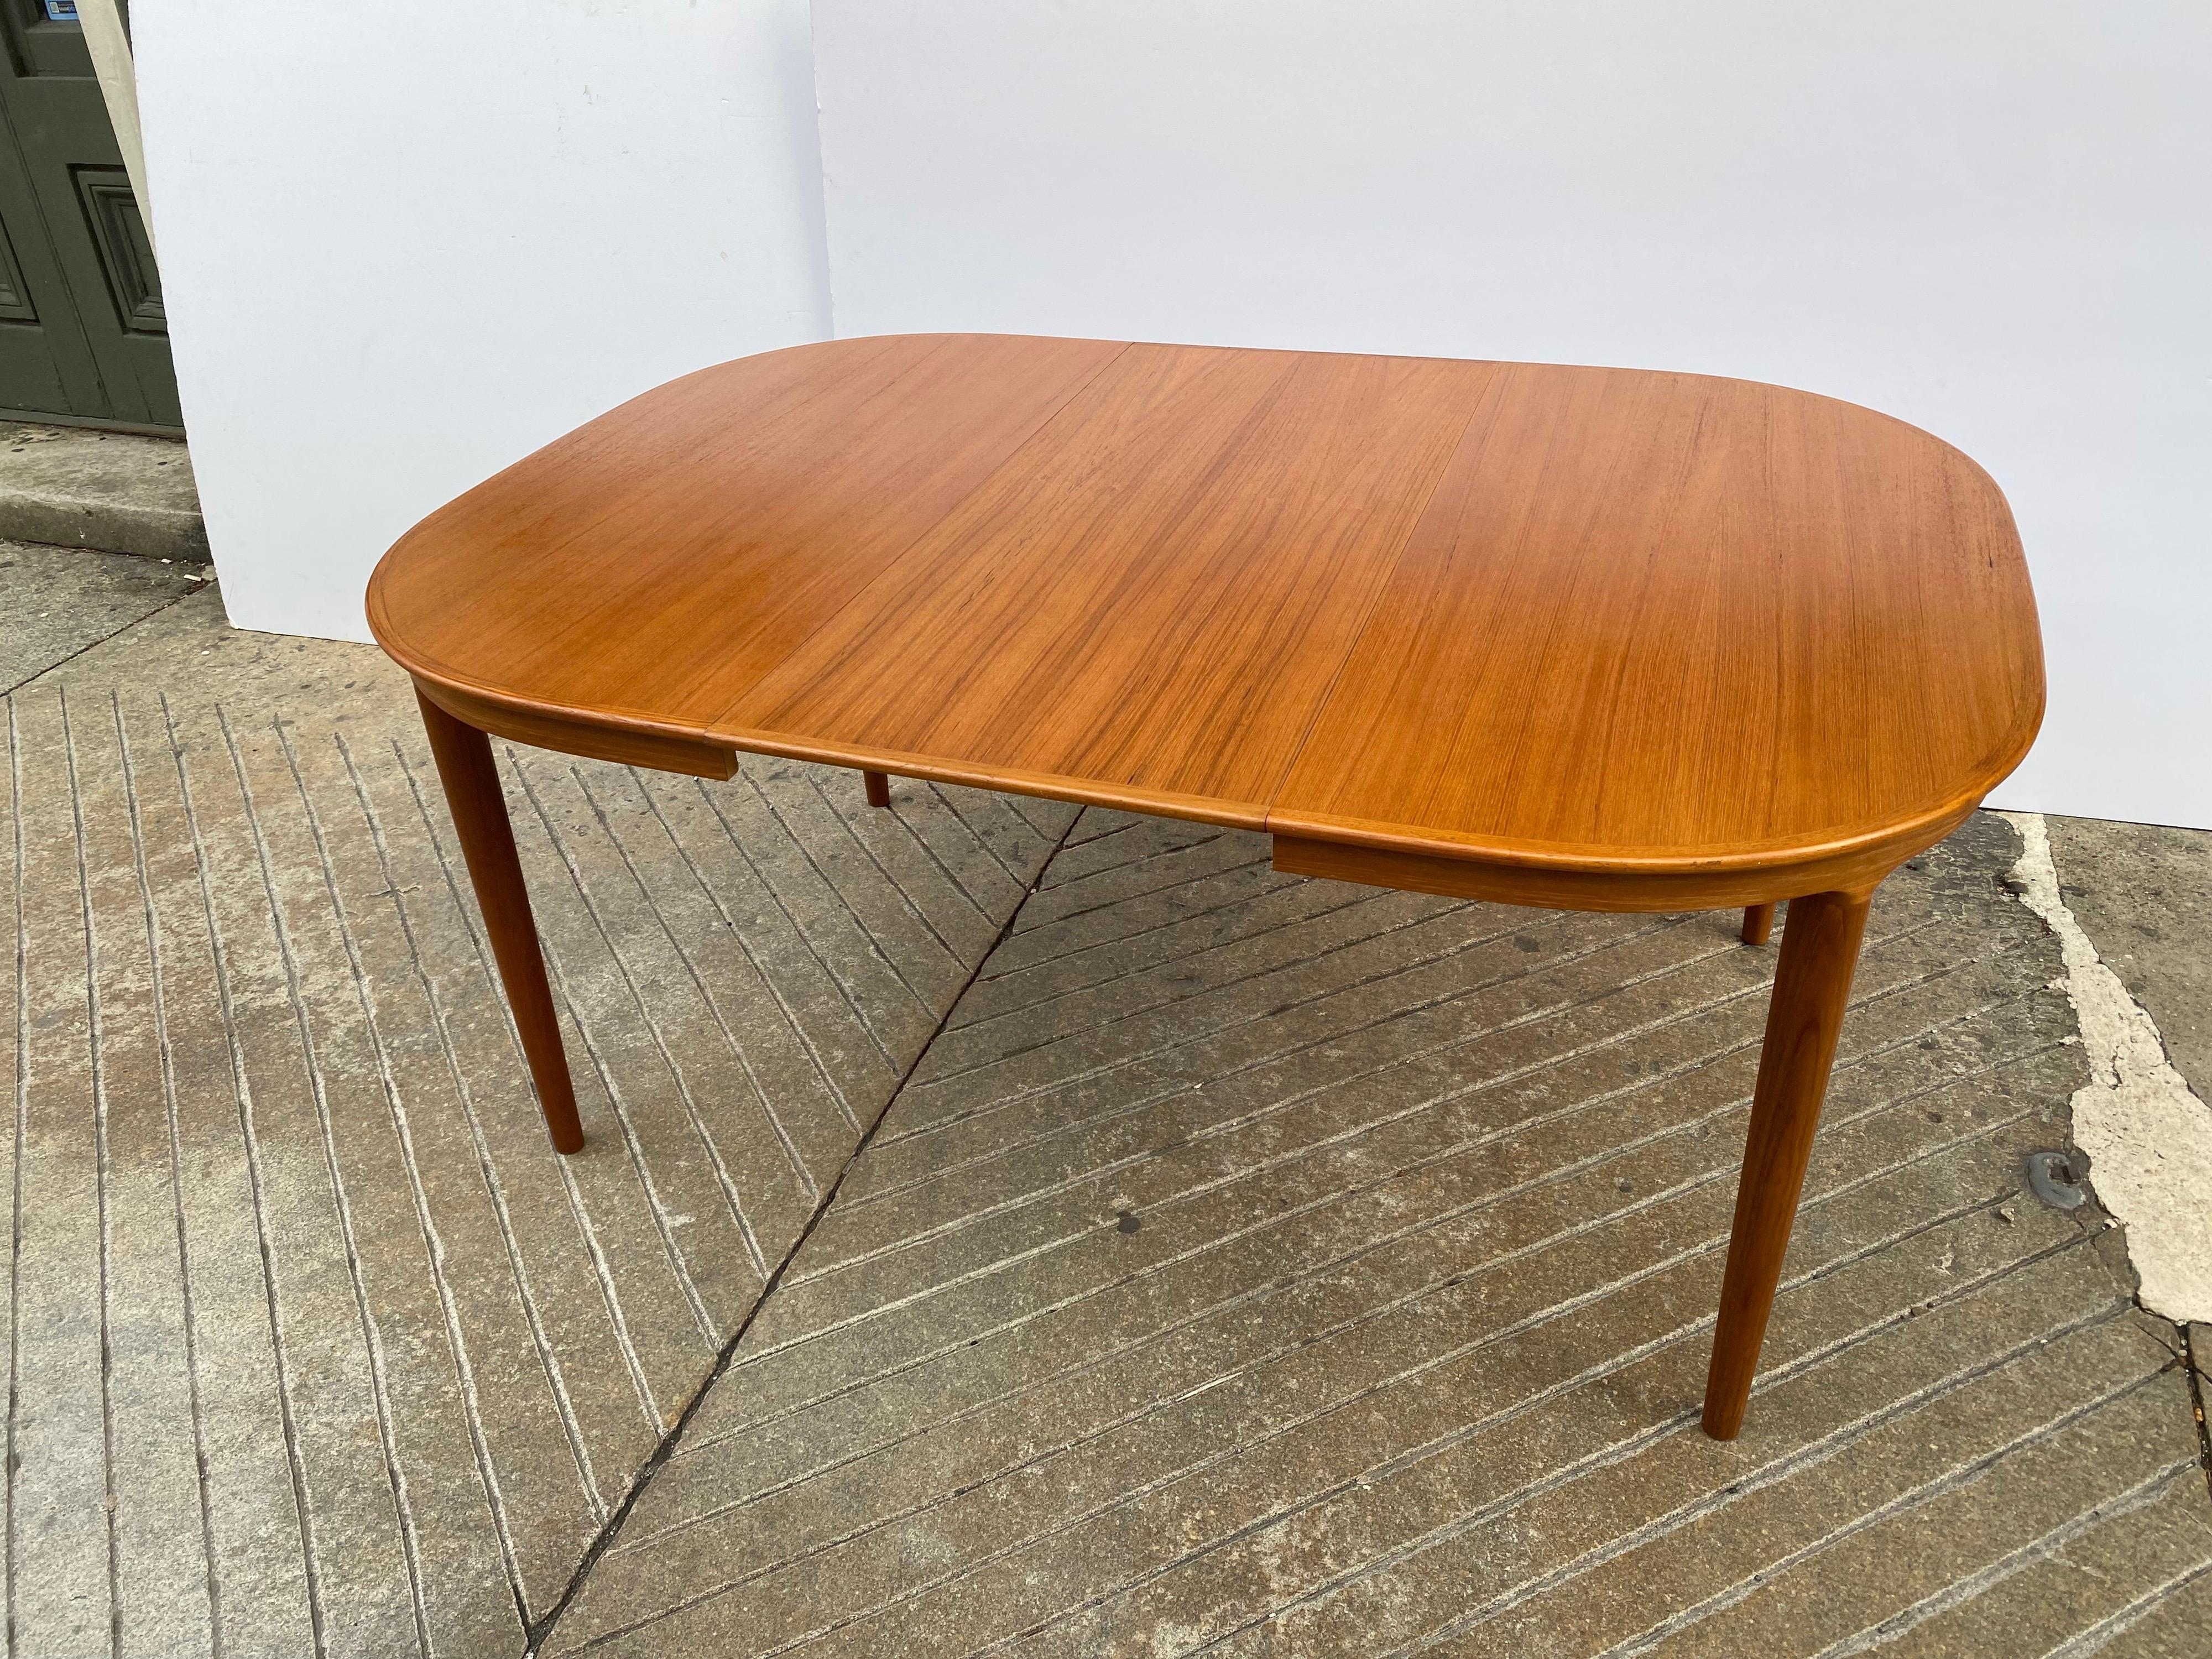 Scandinavian Modern Danish Table with Rounded Corners/ 2 20